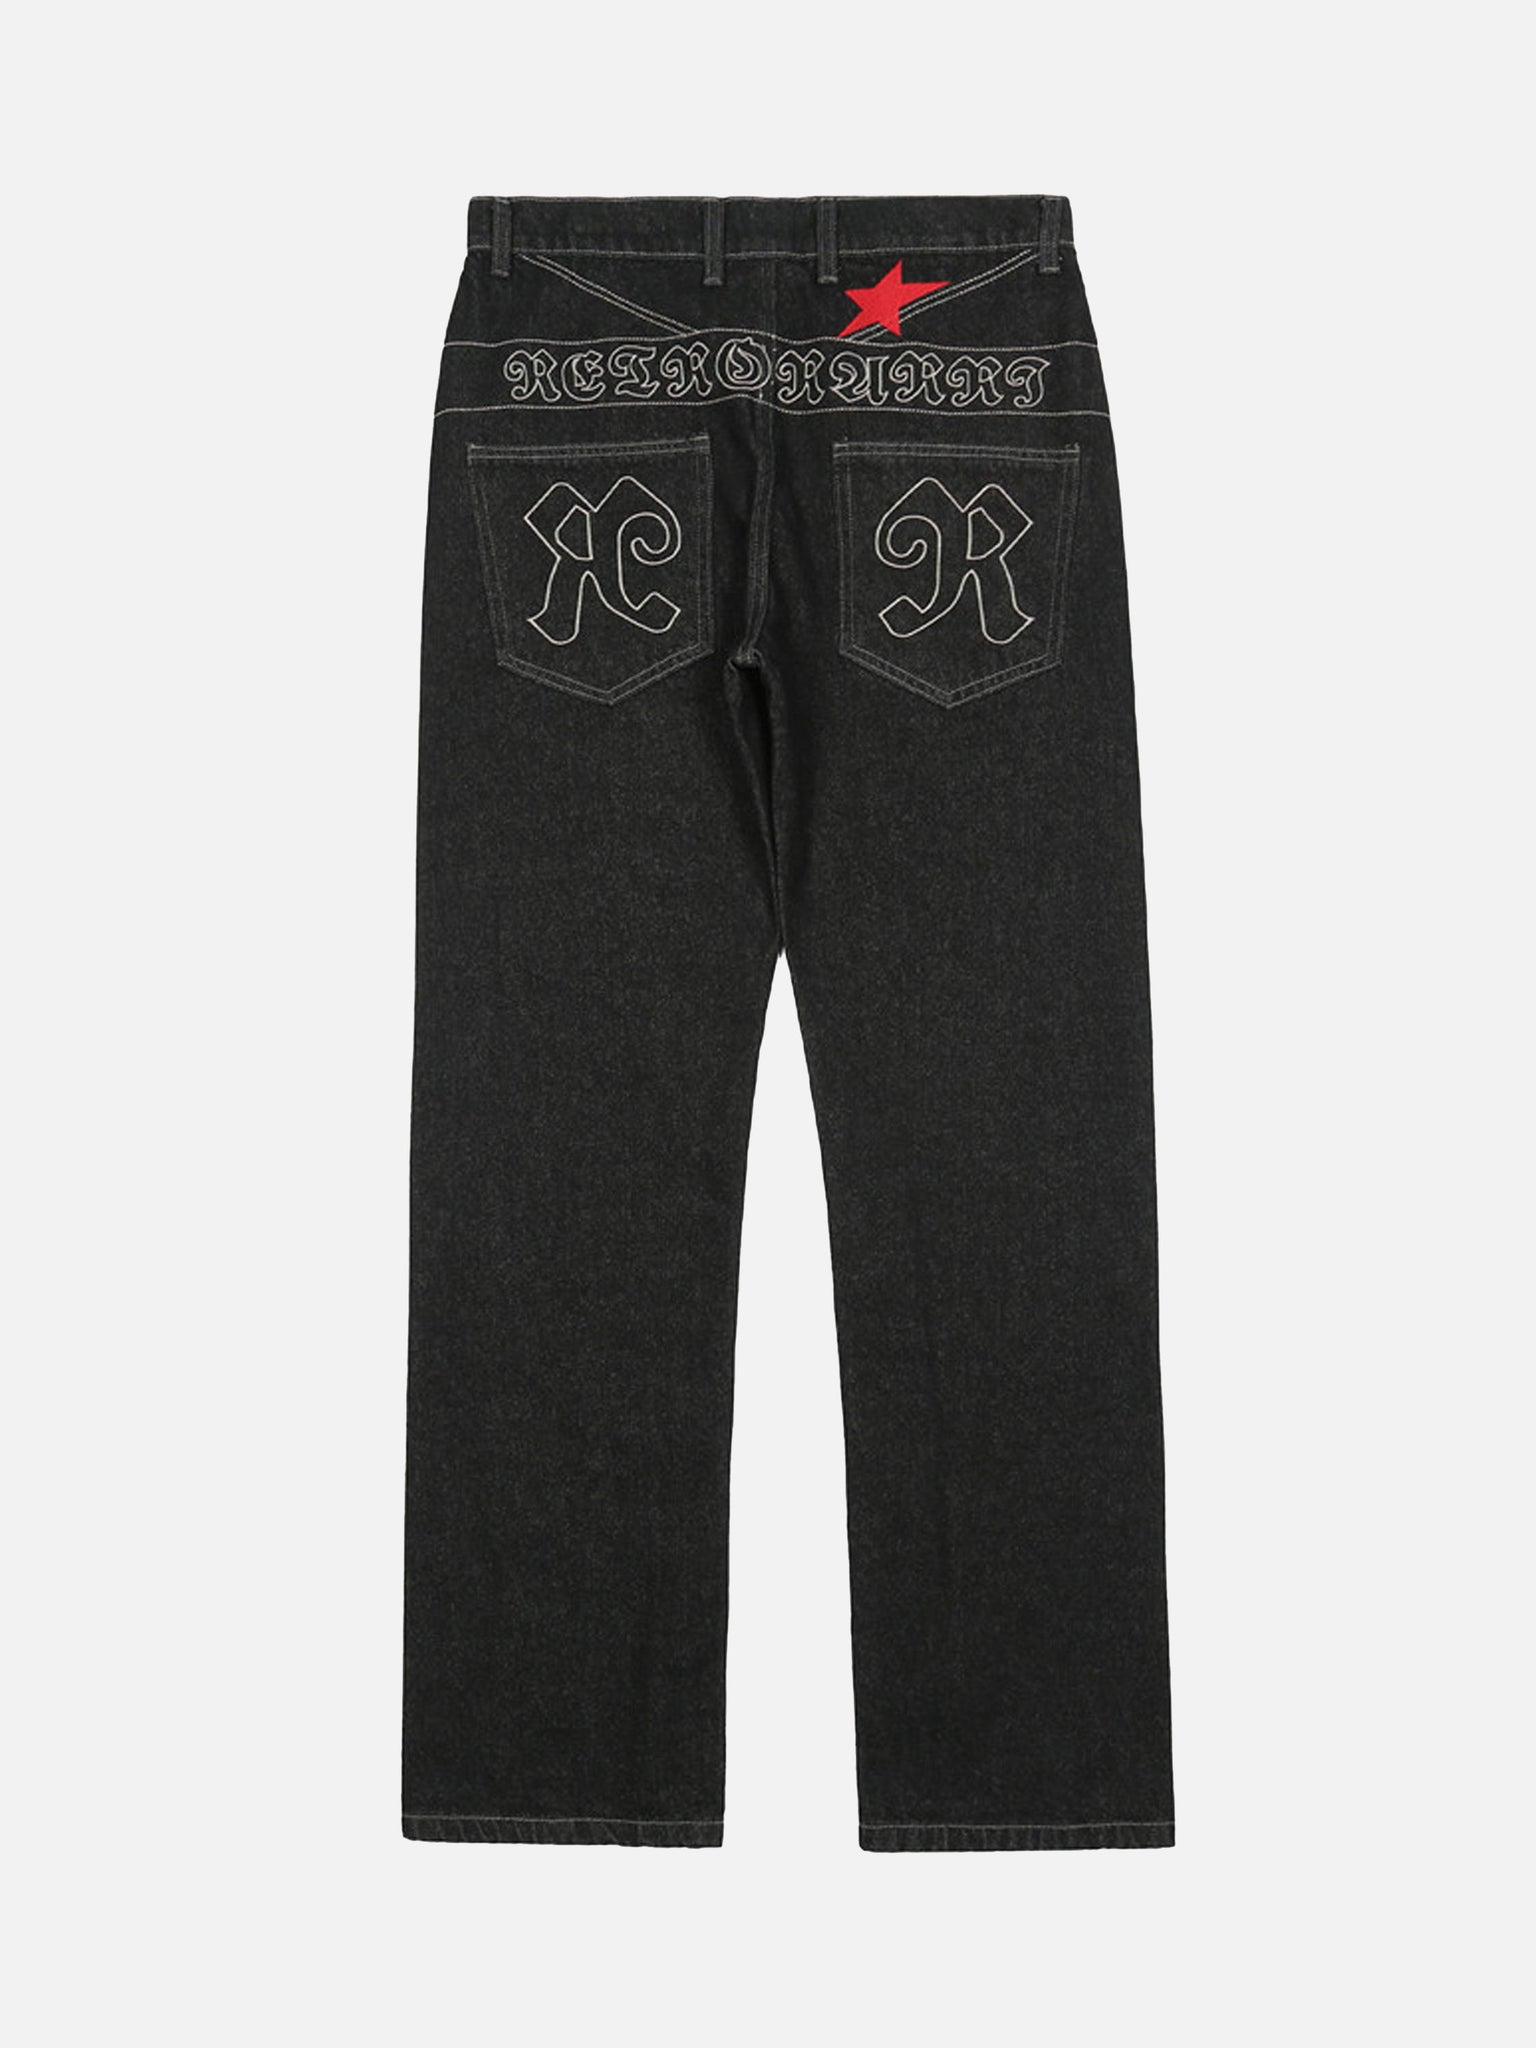 Thesupermade American Letters Embroidered Straight Jeans -1571